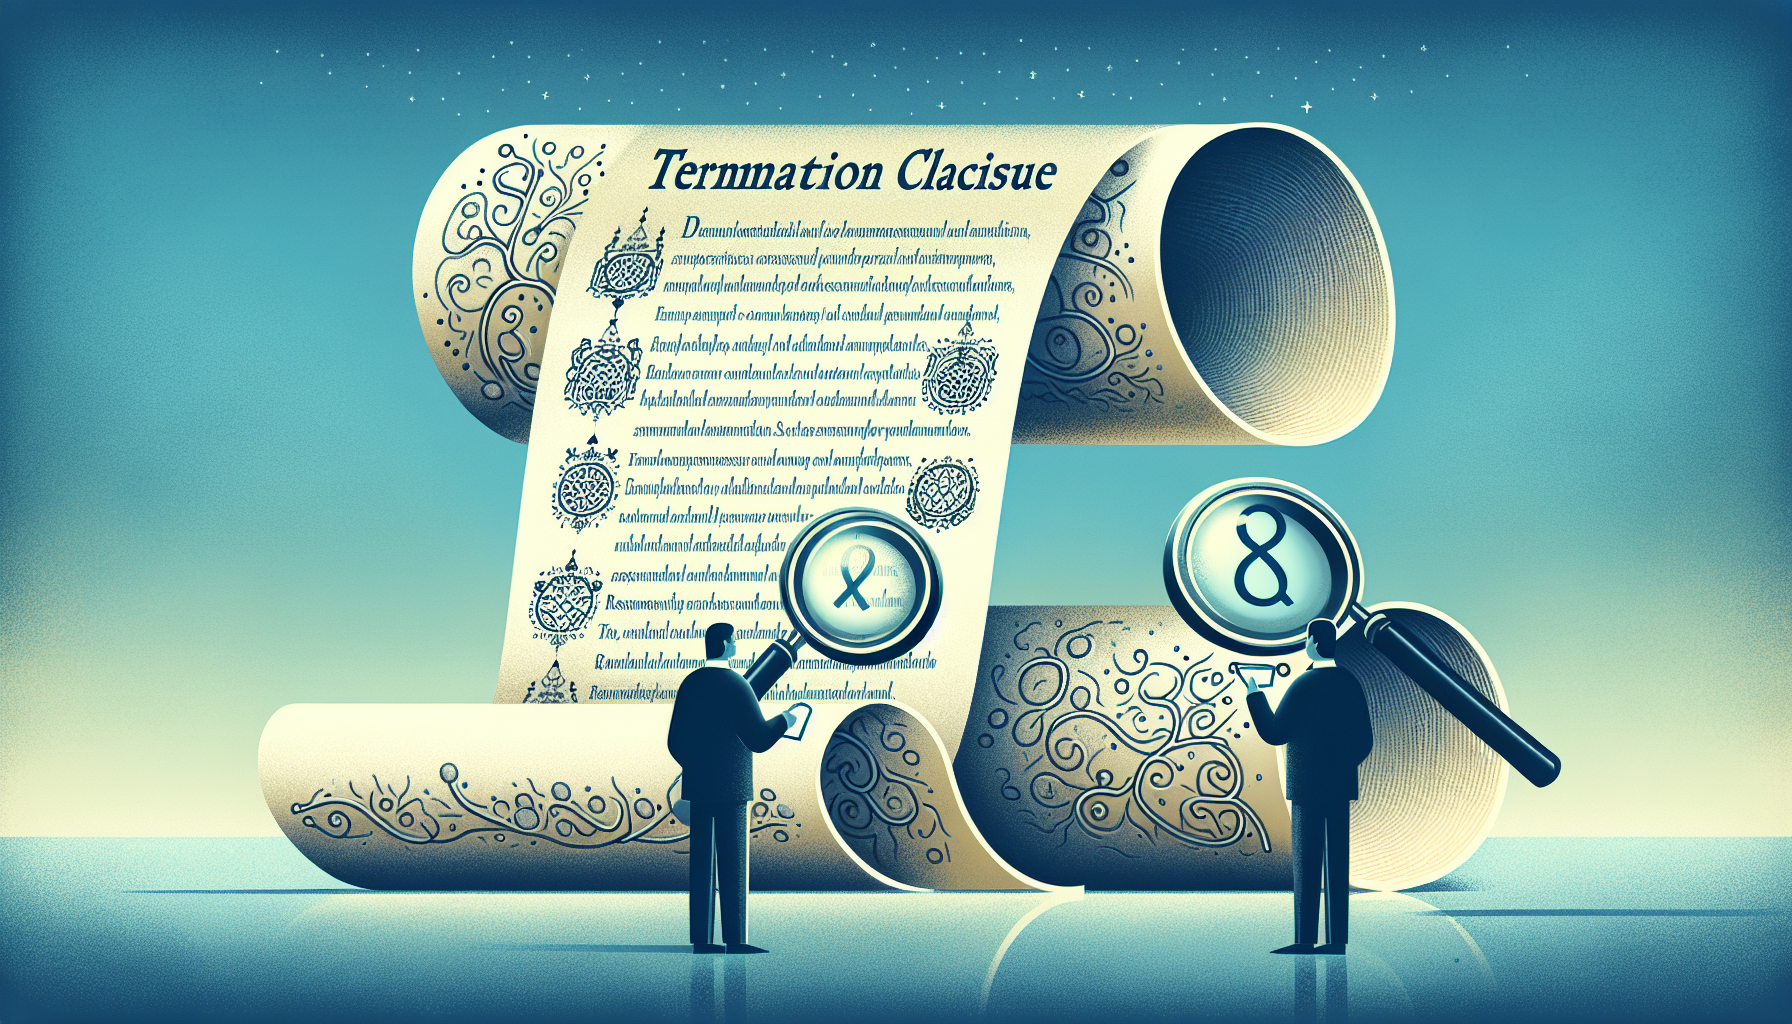 Illustration of mitigating risks with termination clauses